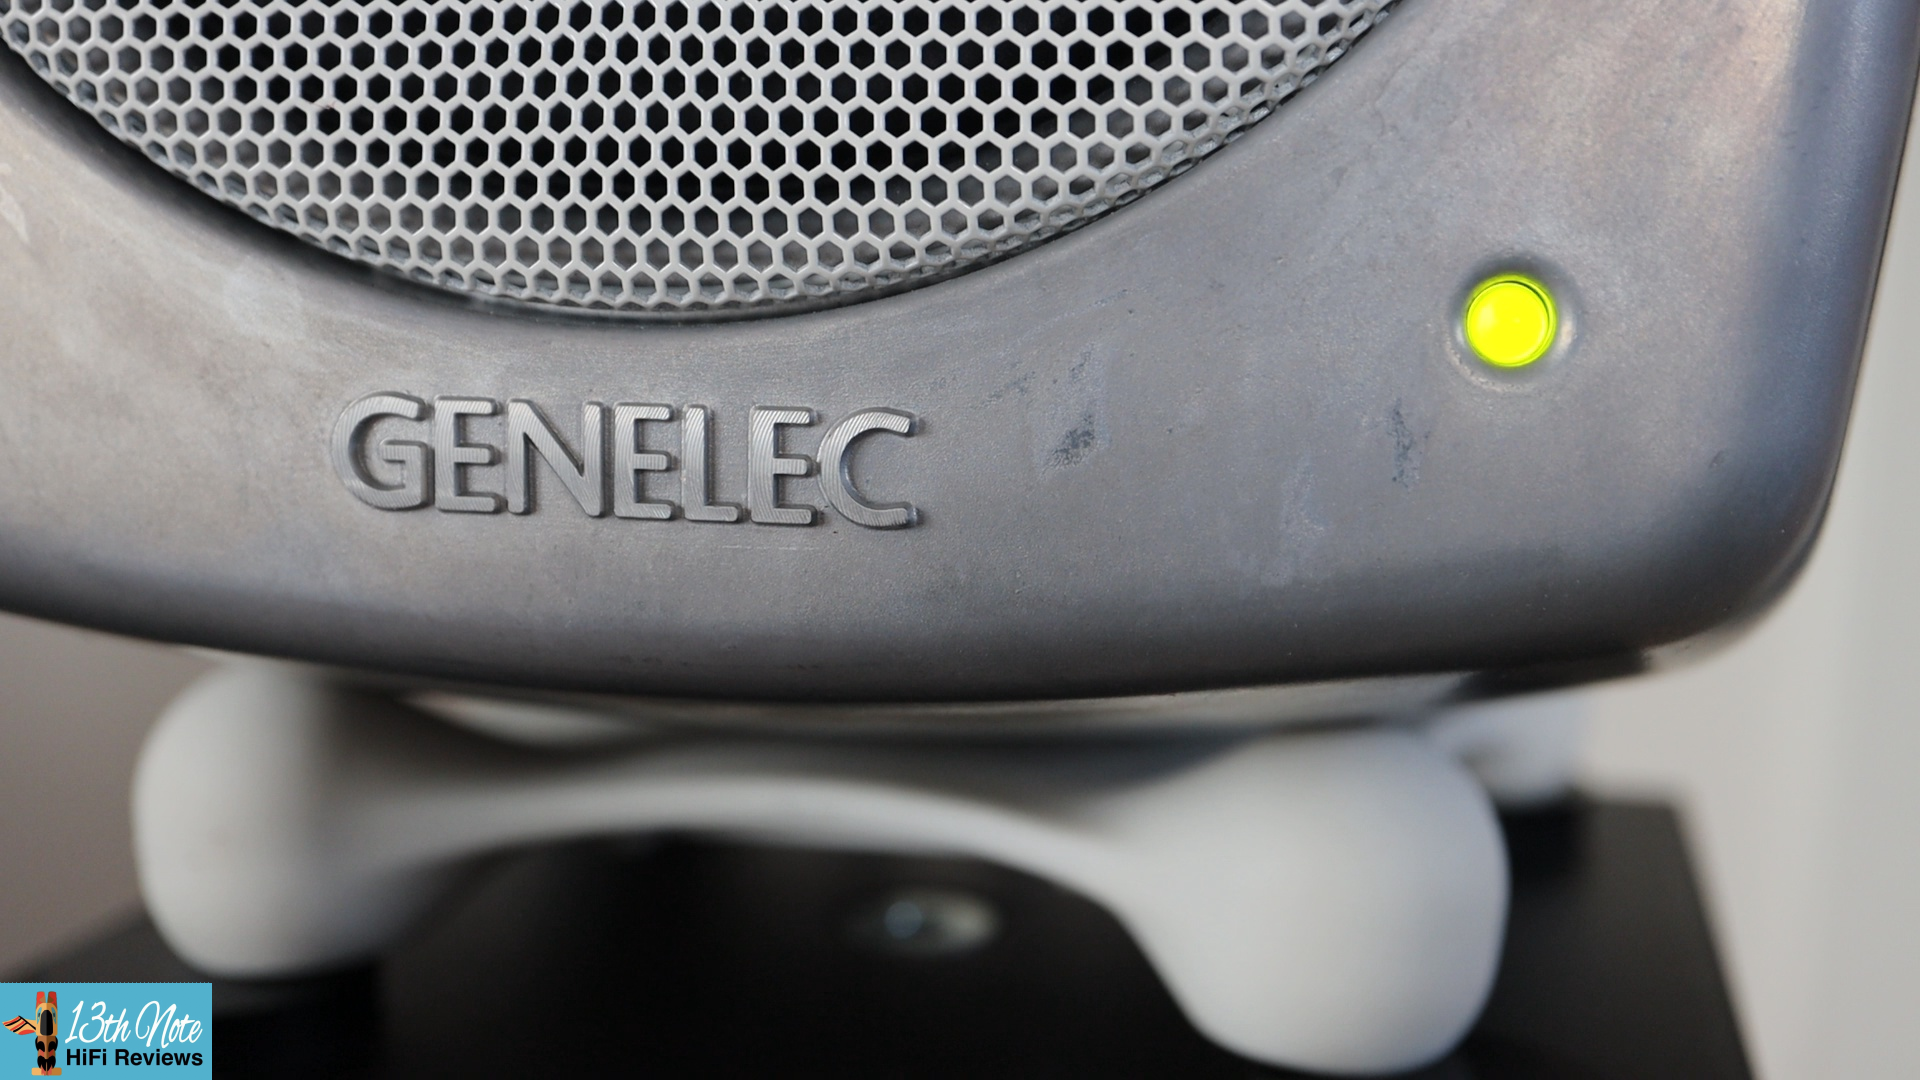 Genelec’s 8330A Active Speakers & 7350A Sub for HiFi!